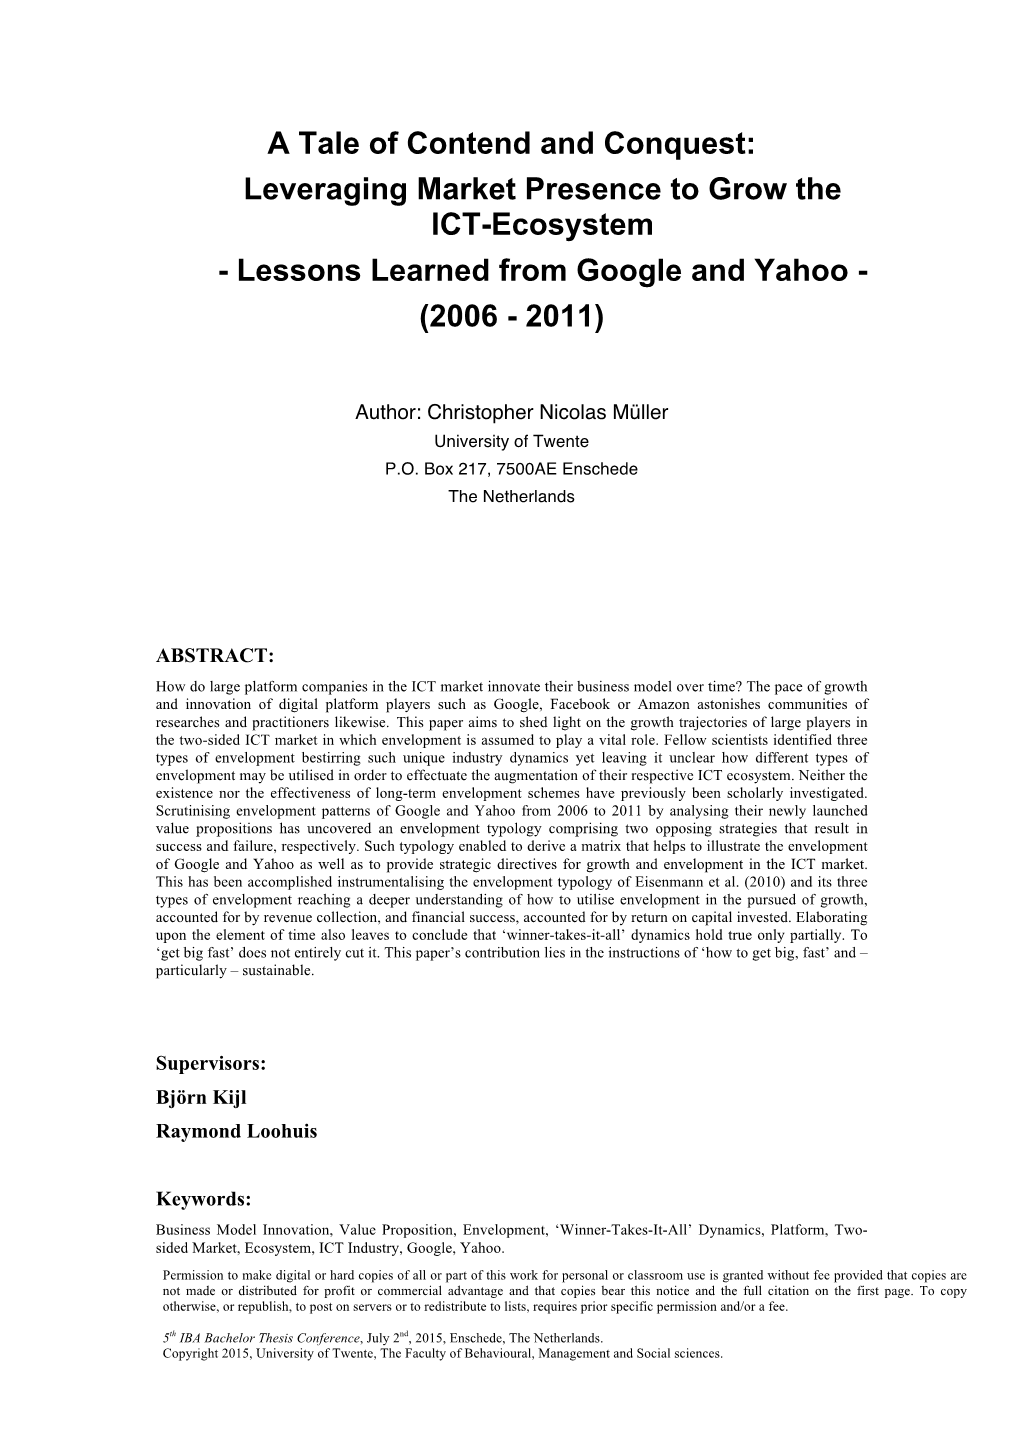 Leveraging"Market"Presence"To"Grow"The" ICT>Ecosystem" >"Lessons"Learned"From"Google"And"Yahoo">" (2006">"2011)"